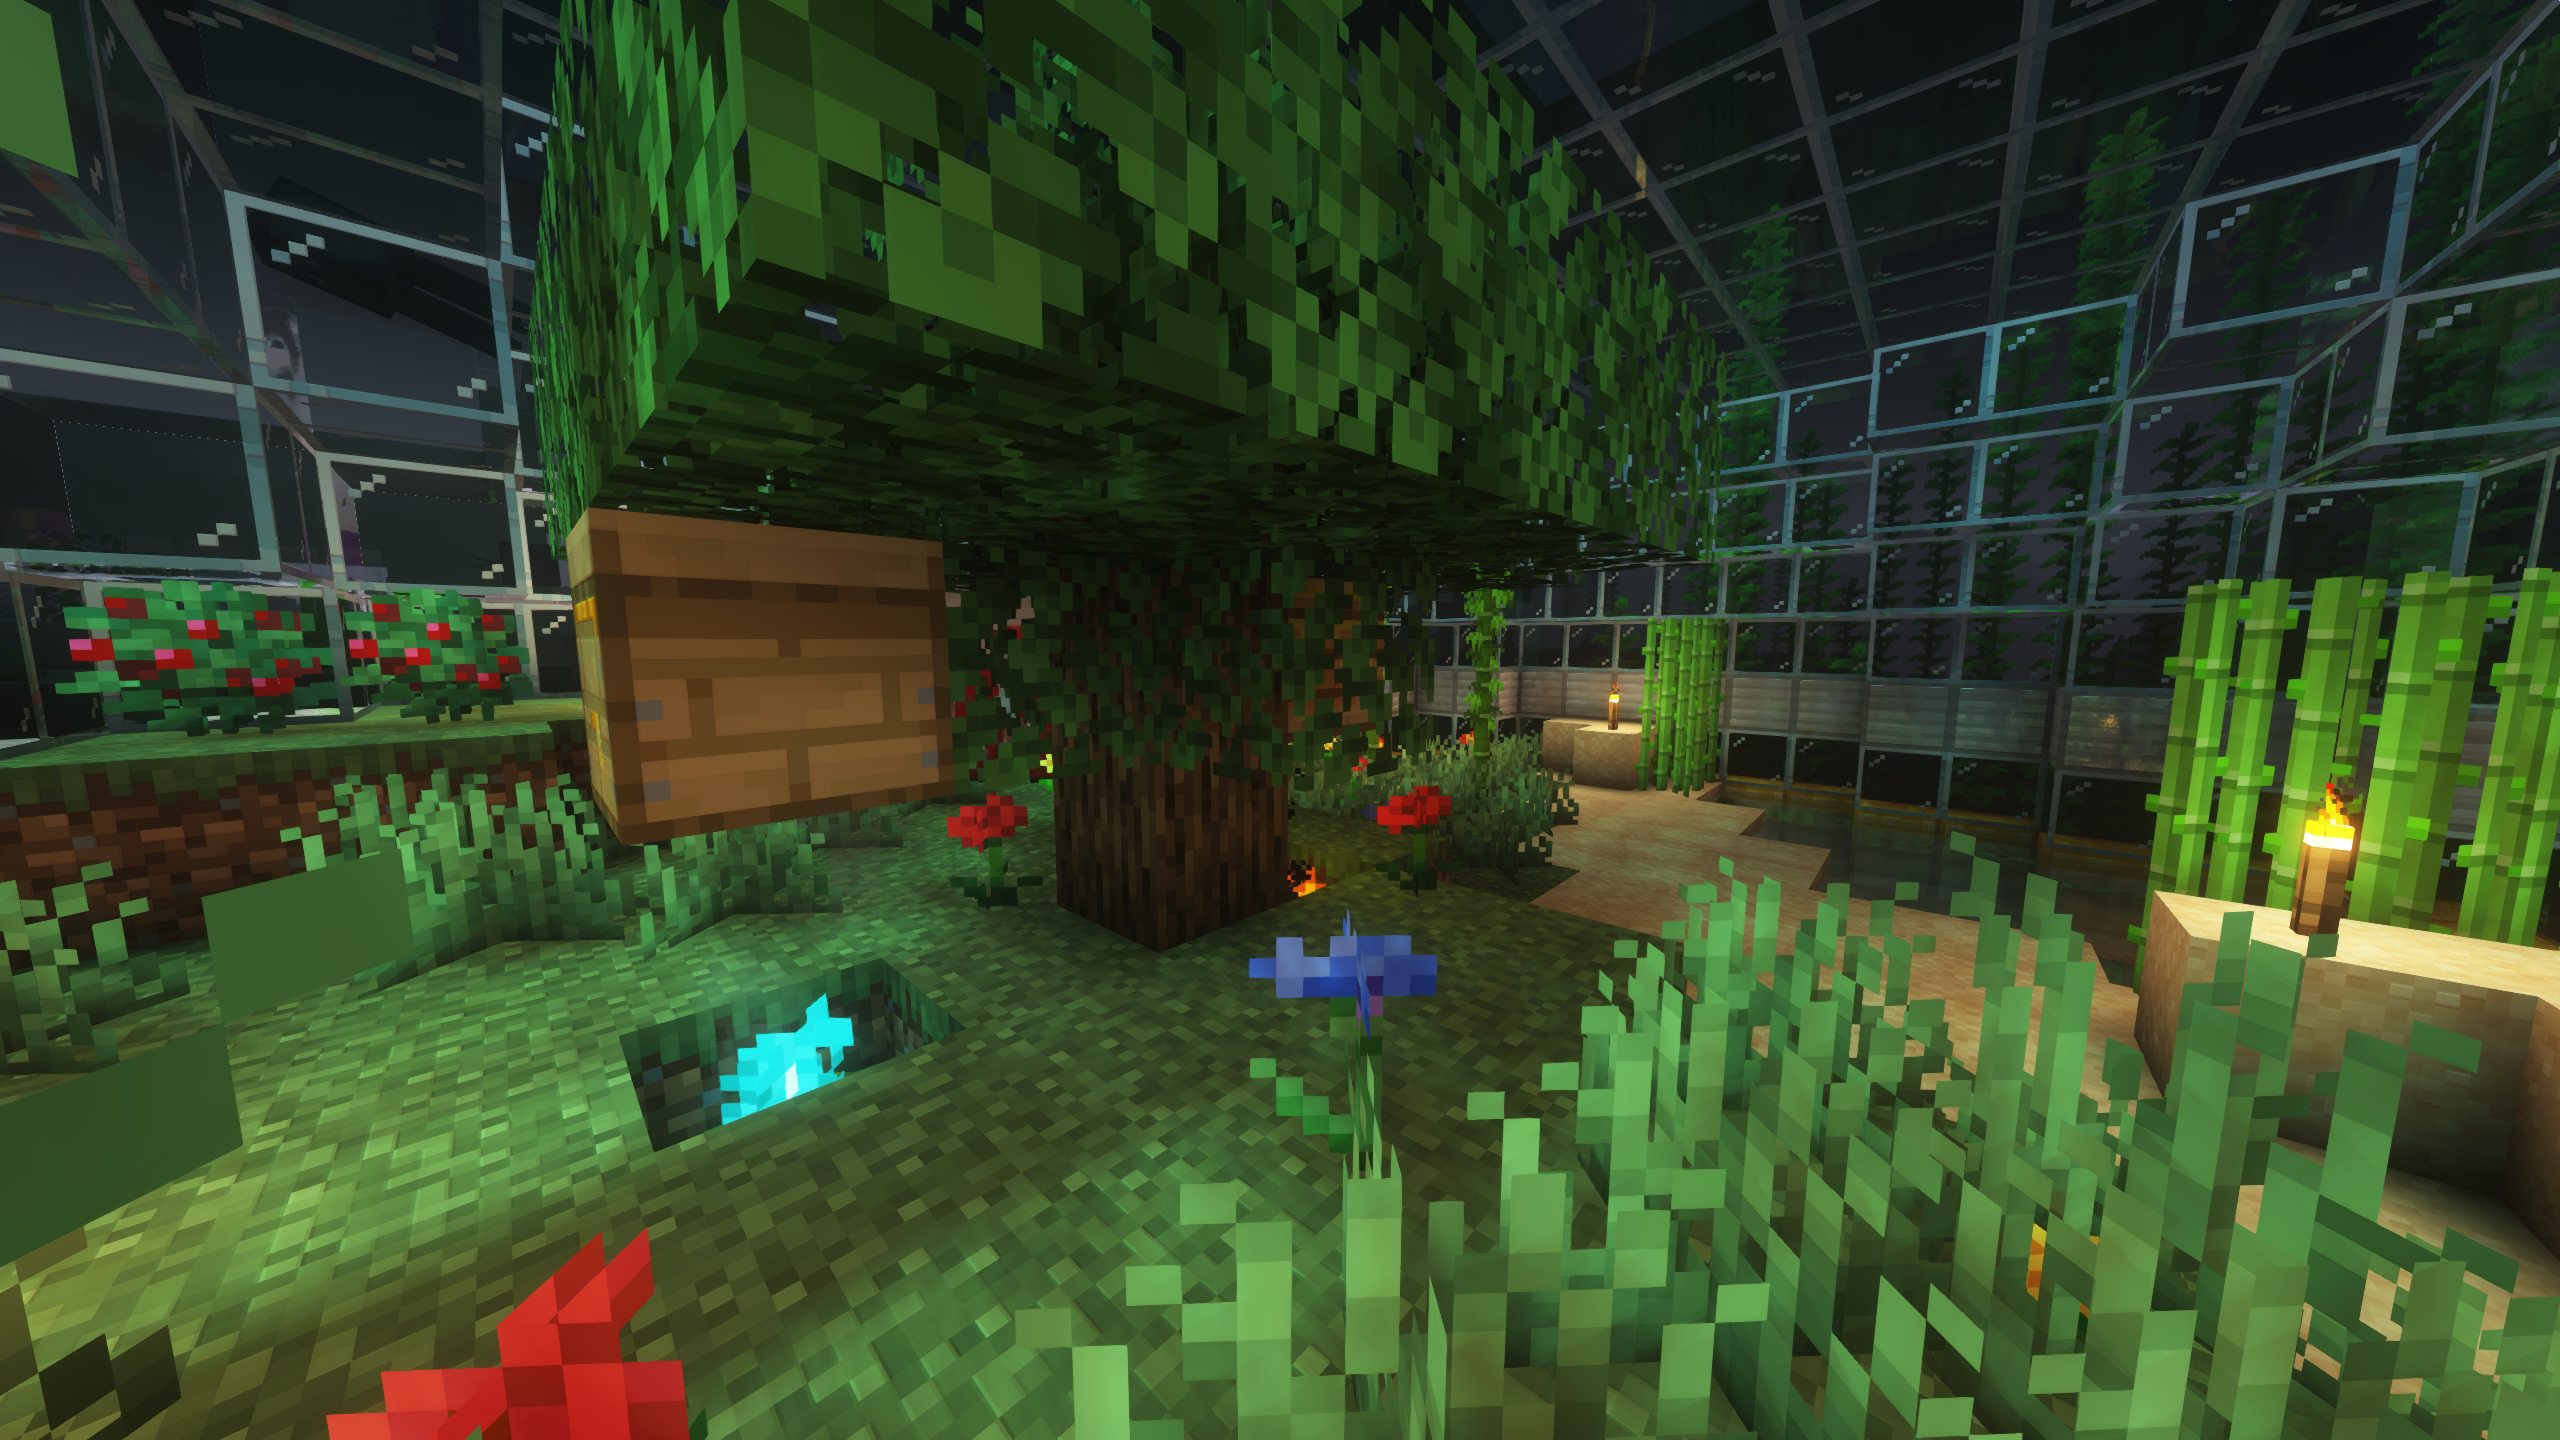 A screenshot from inside my main base using this modpack and the Rethinking Voxels shader